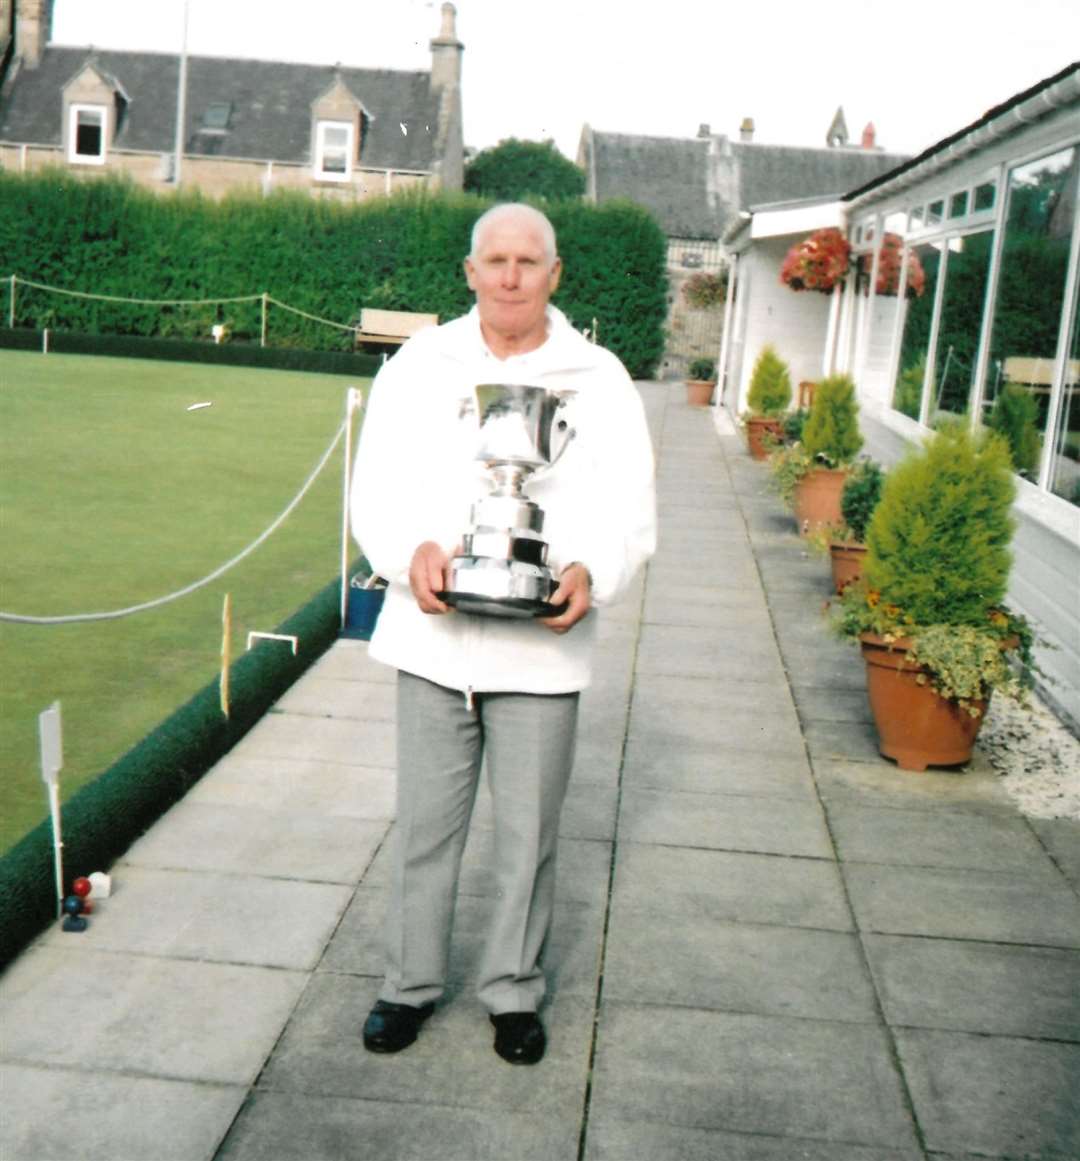 Billy MacDougall at Planefield Bowling Club